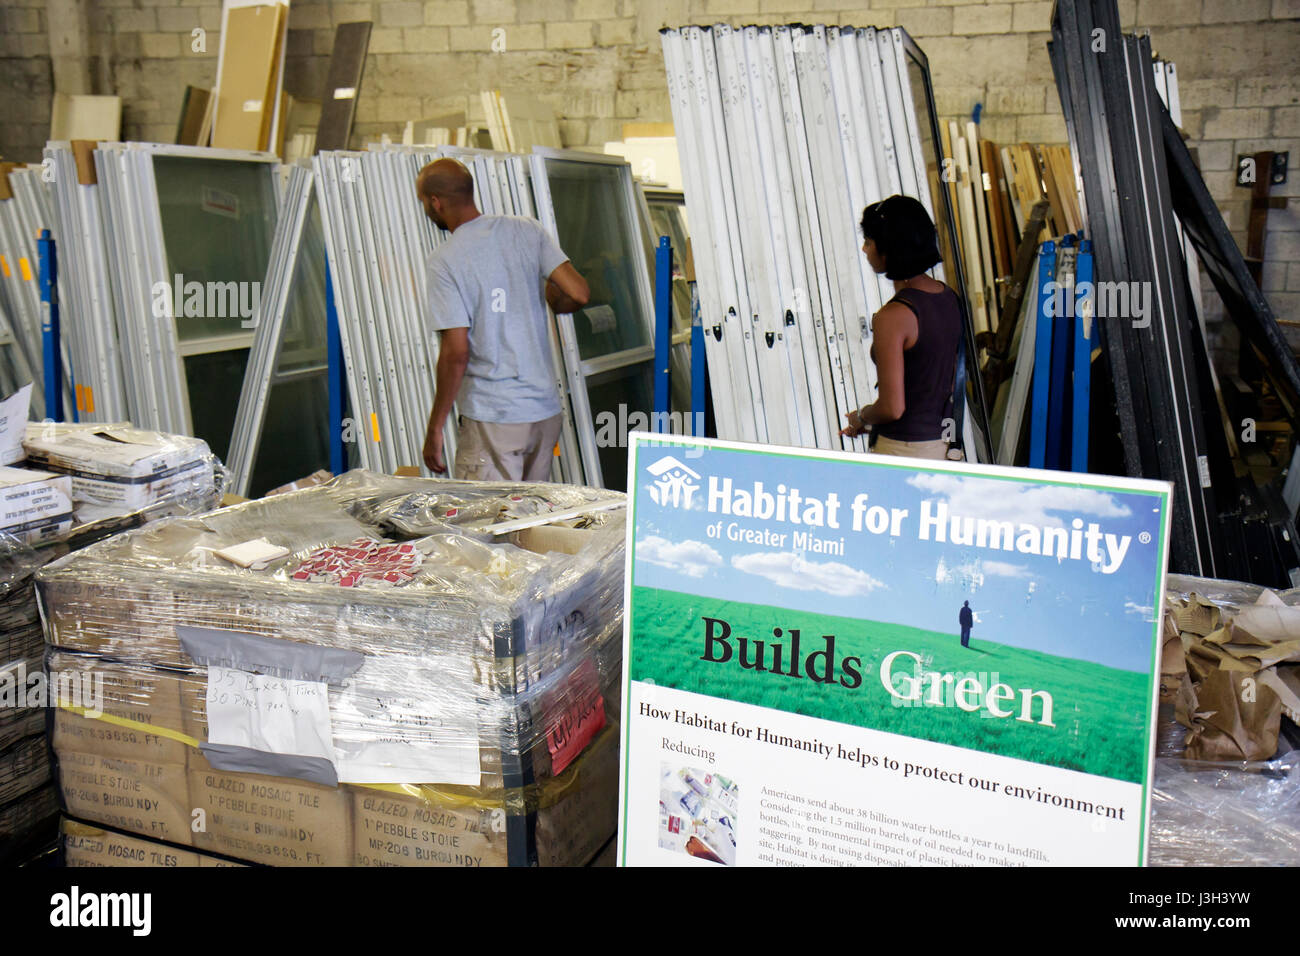 Miami Florida,Habitat for Humanity ReStore,sells donated building materials,tools,appliances,home furnishings,used,build,under new construction site b Stock Photo